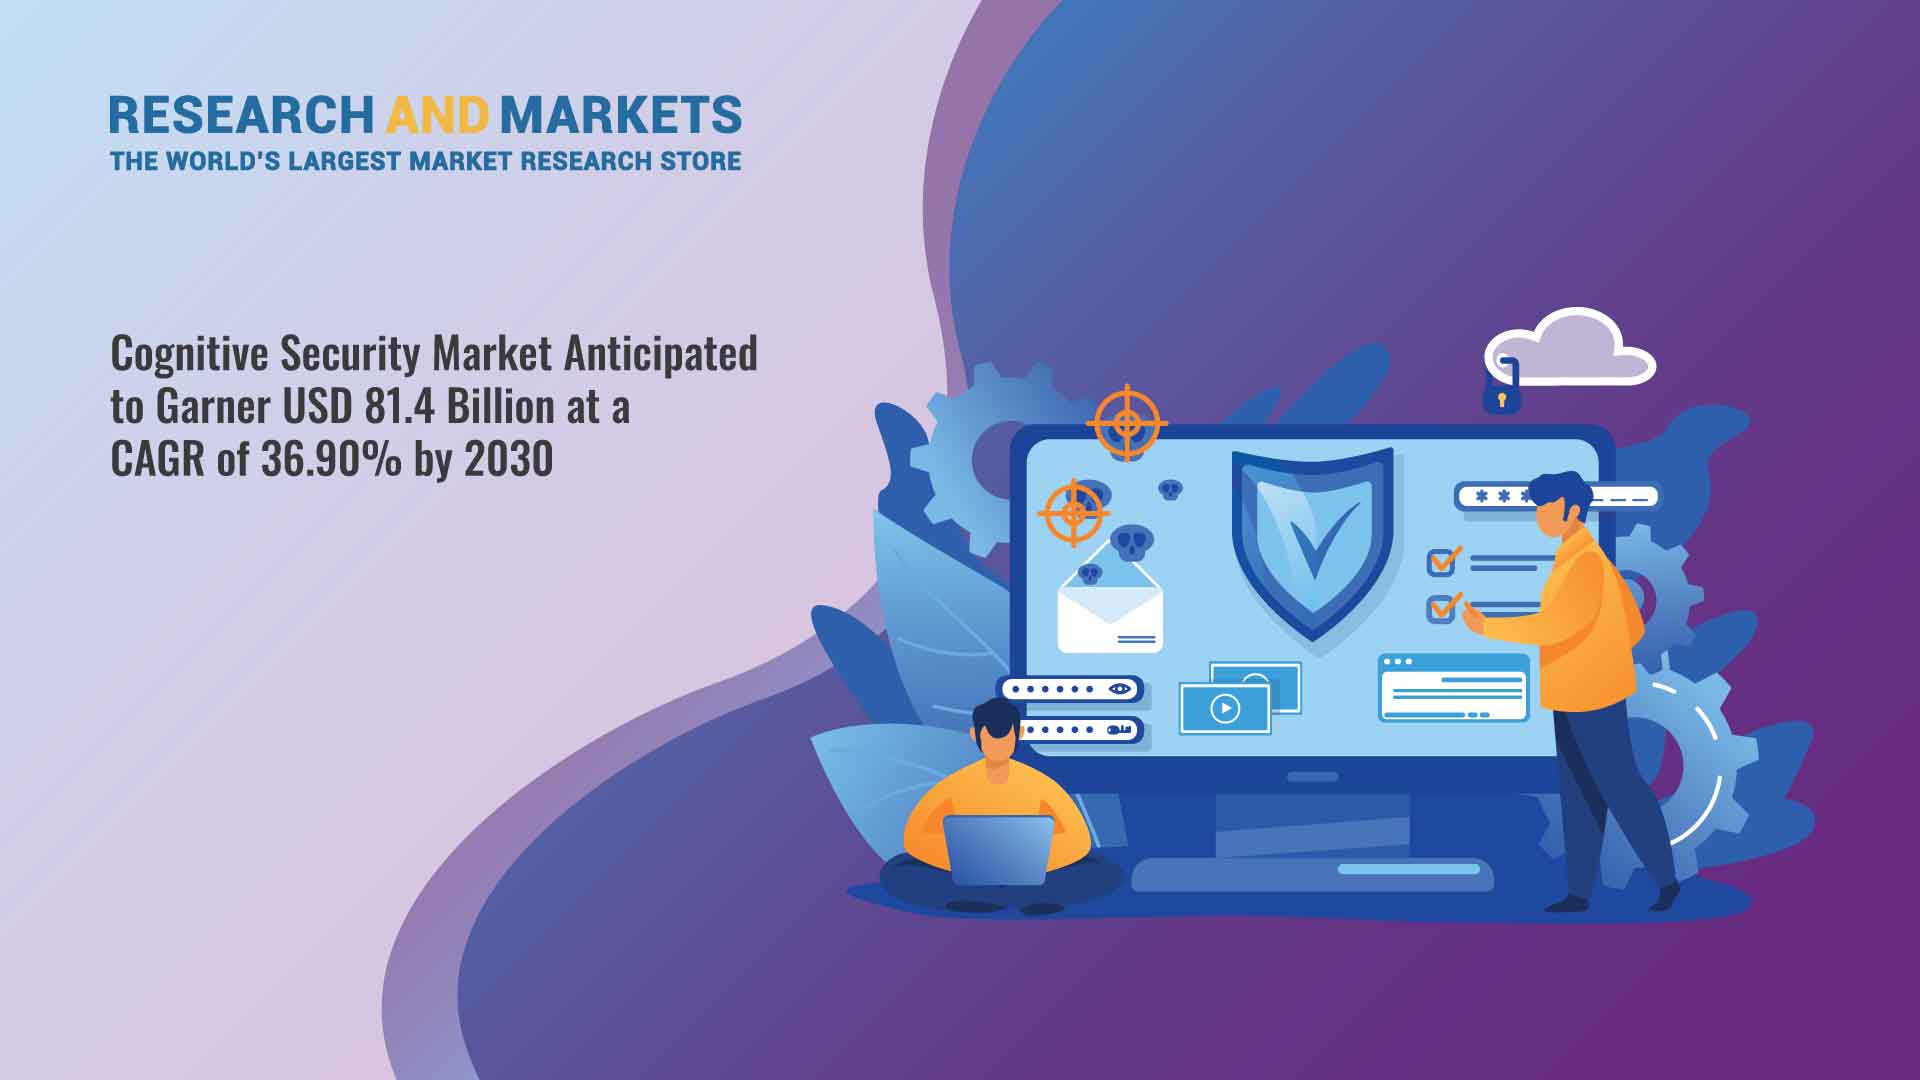 Cognitive Security Market Anticipated to Garner USD 81.4 Billion at a CAGR of 36.90% by 2030 - Report by Market Research Future (MRFR)